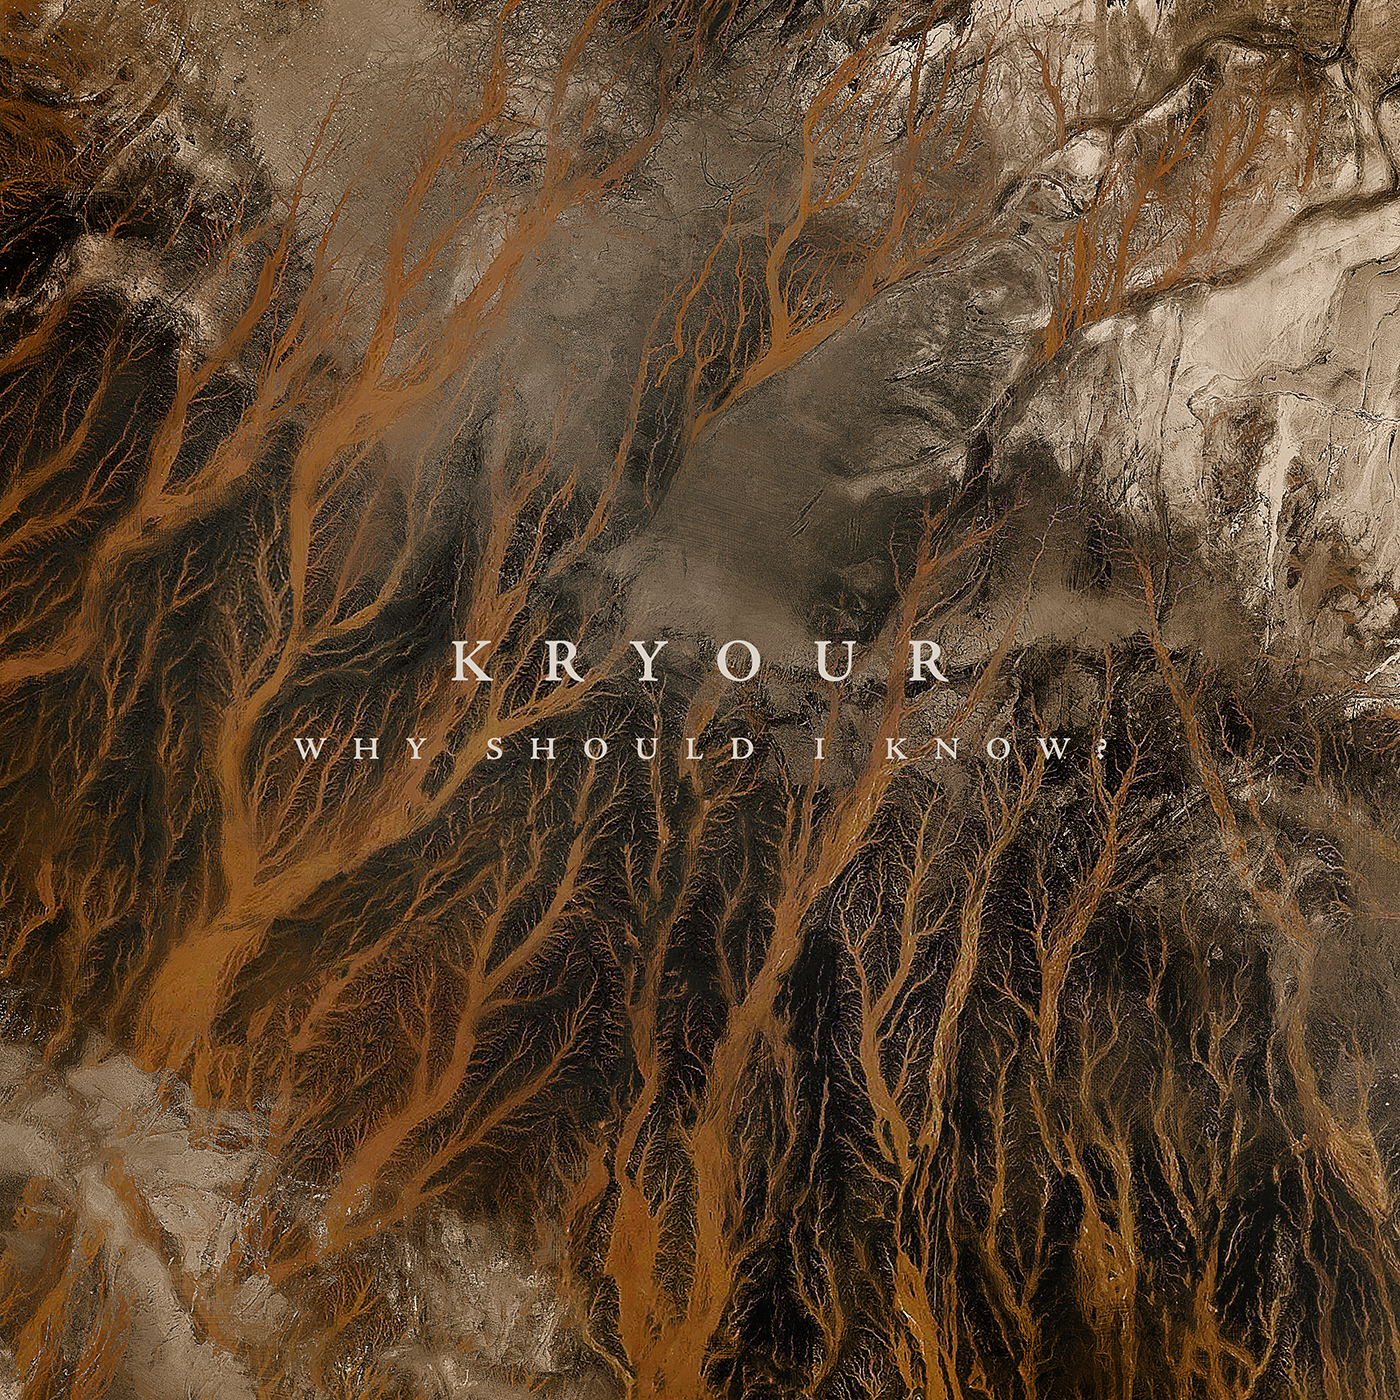 ‘Kryour’ releases single and music video for the unreleased “Why Should I Know?”